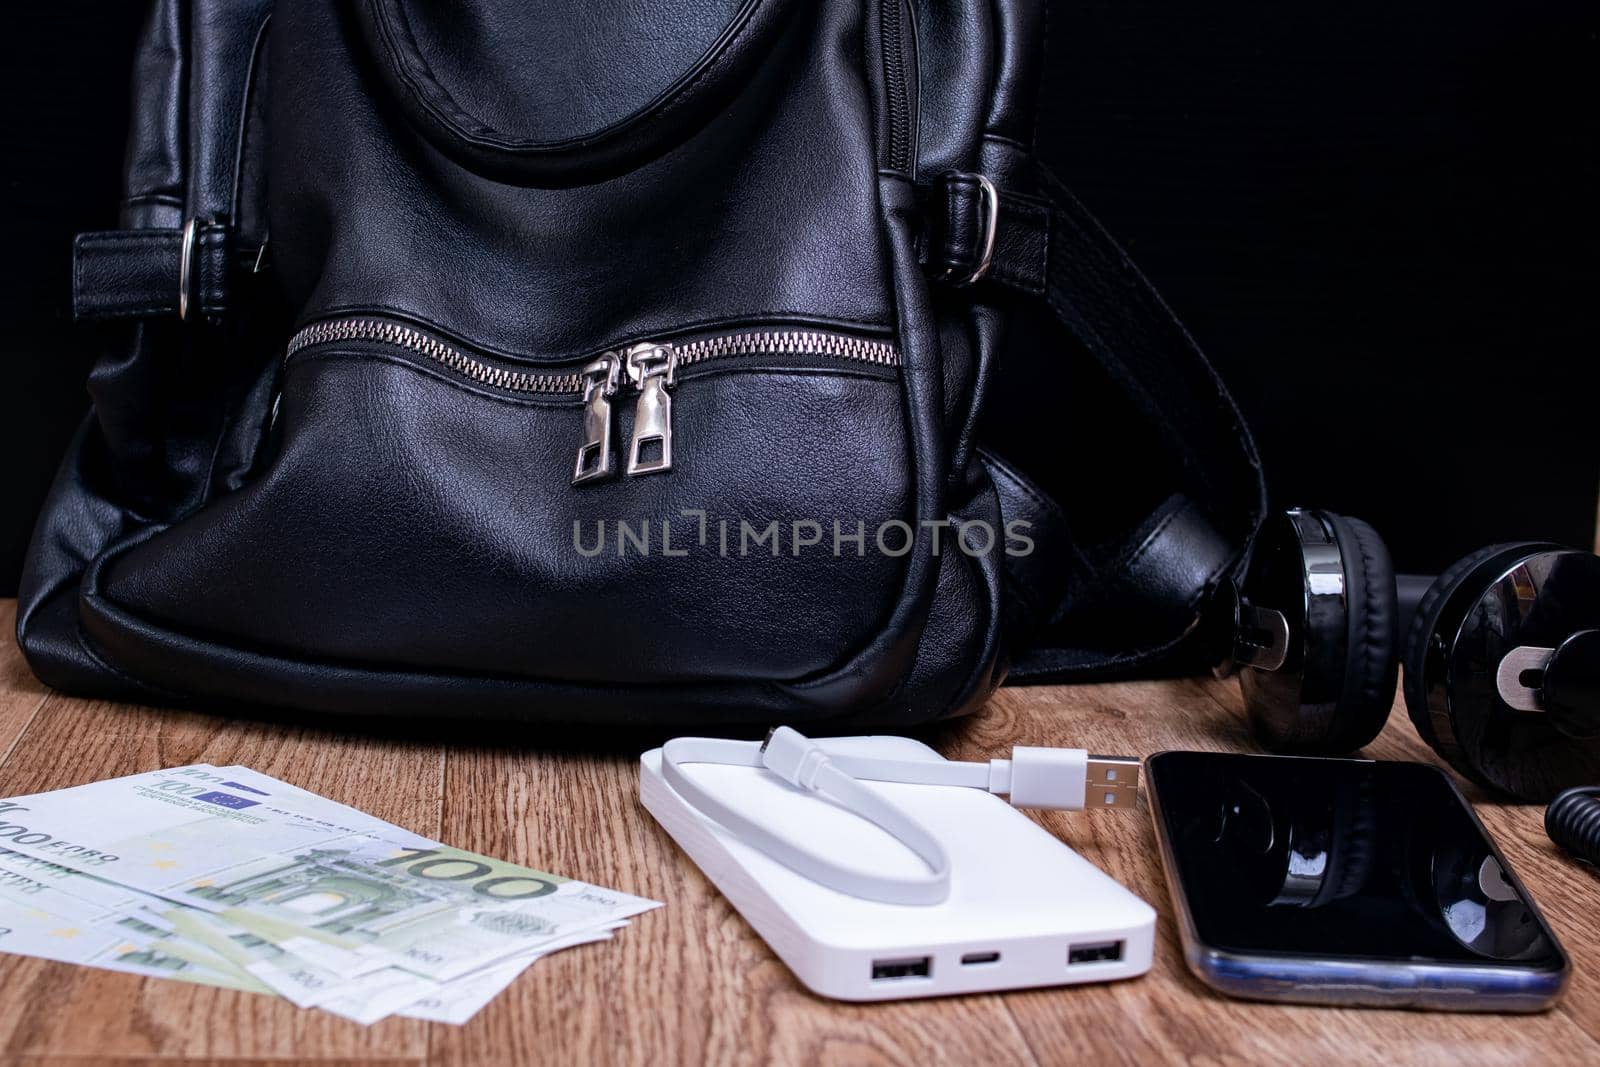 Mobile phone, power bank, bag, money and headphones on a wooden table